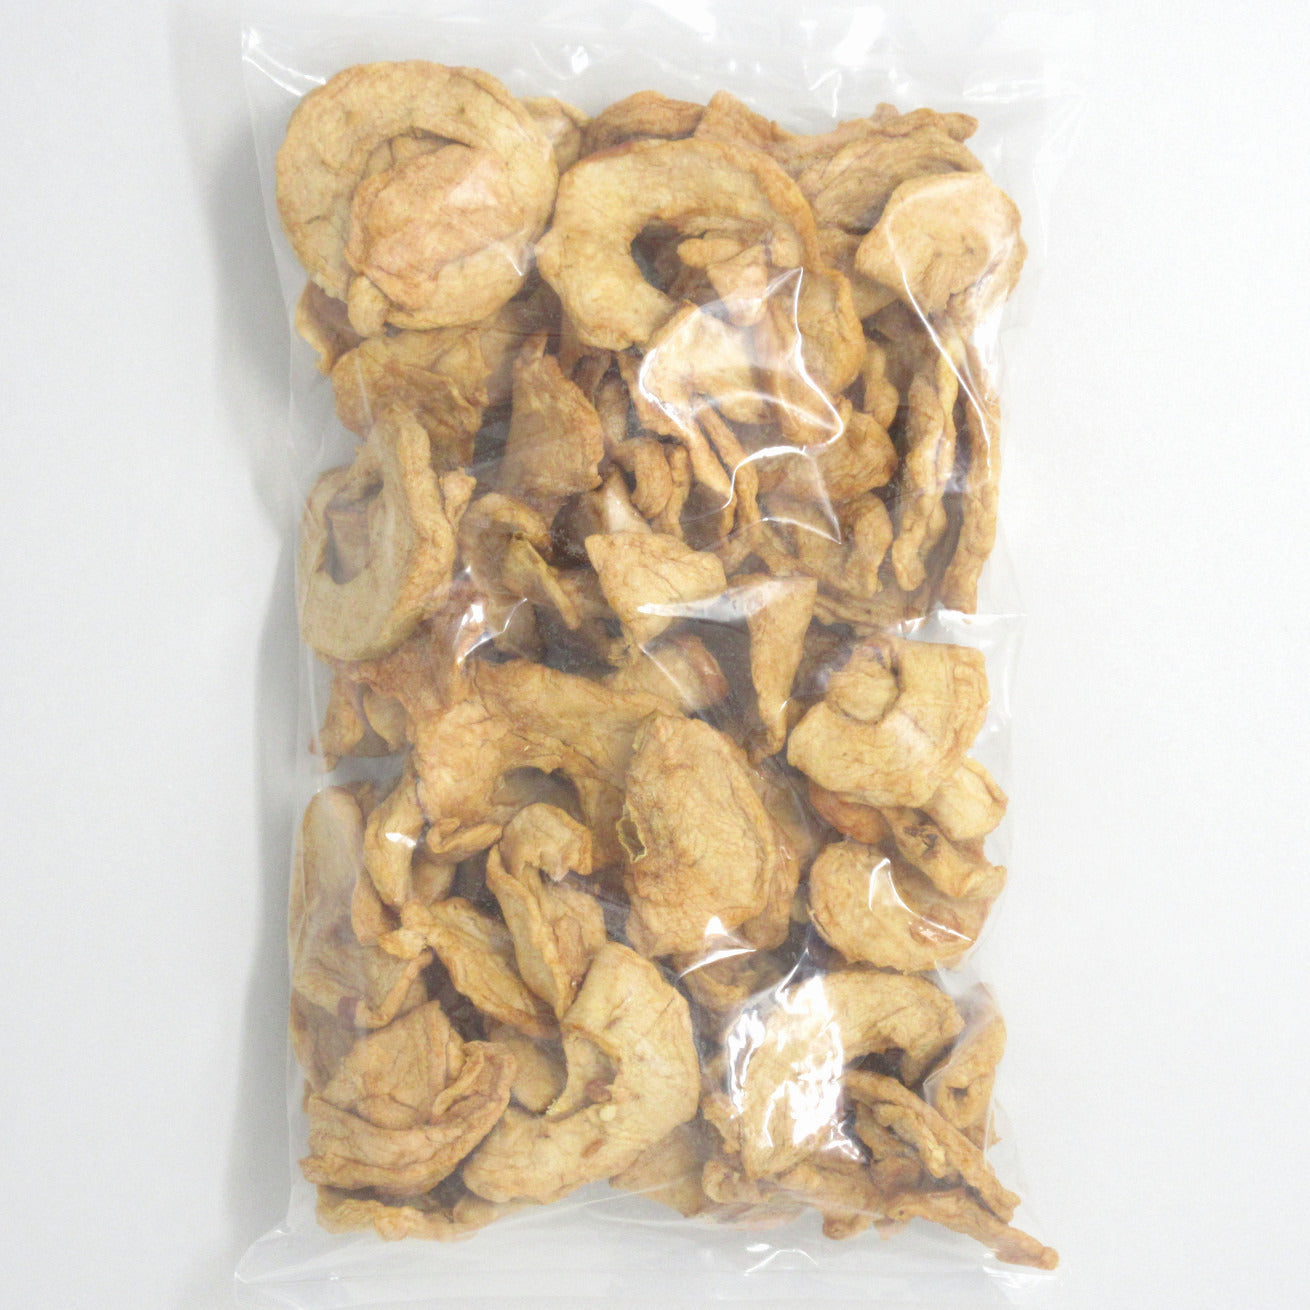 Flour Barrel product image - Dried Apple Rings